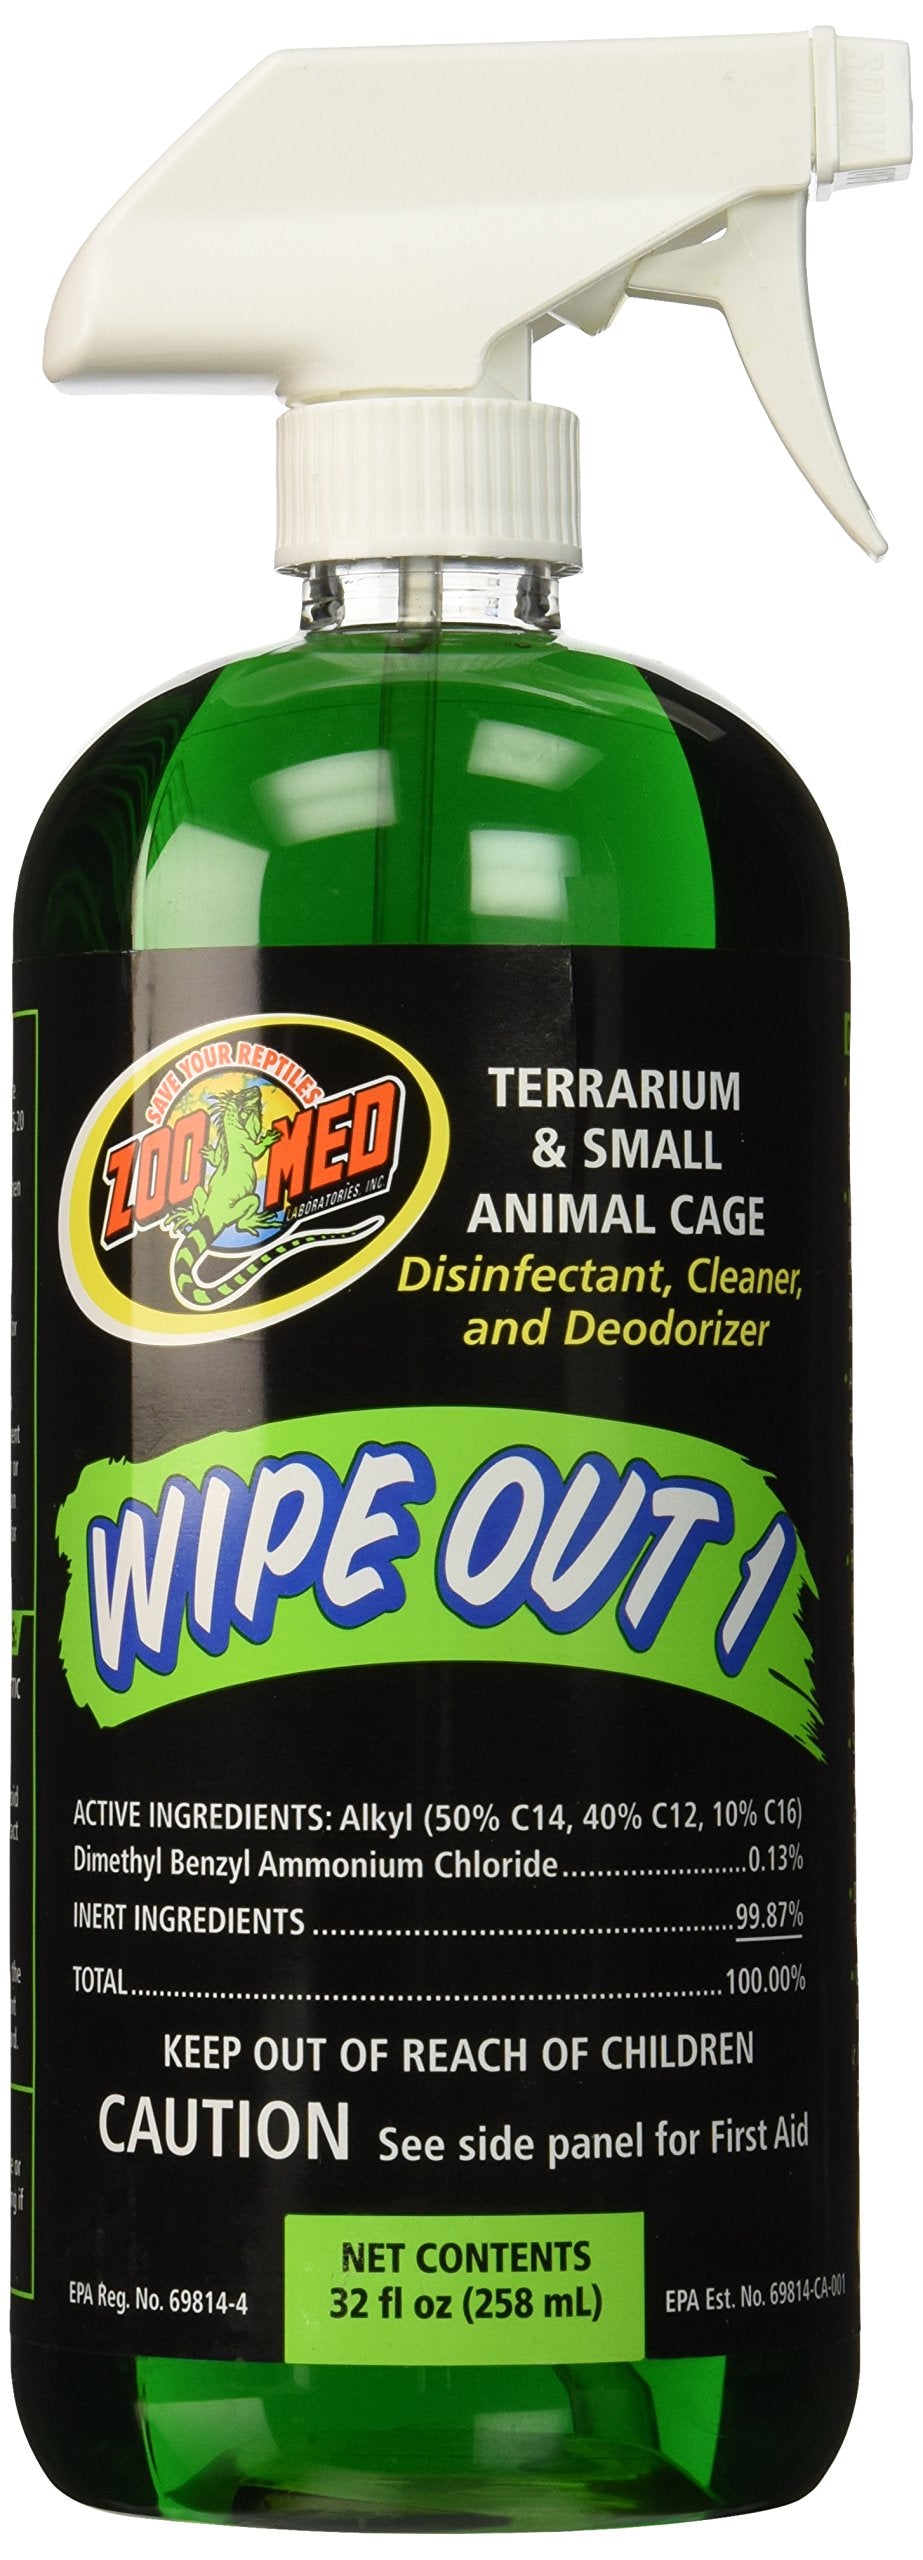 Zoo Med Laboratories Wipeout All-Natural Terrarium and Small Animal Disinfectant Cleaner and Deodorizer - 32 Oz  